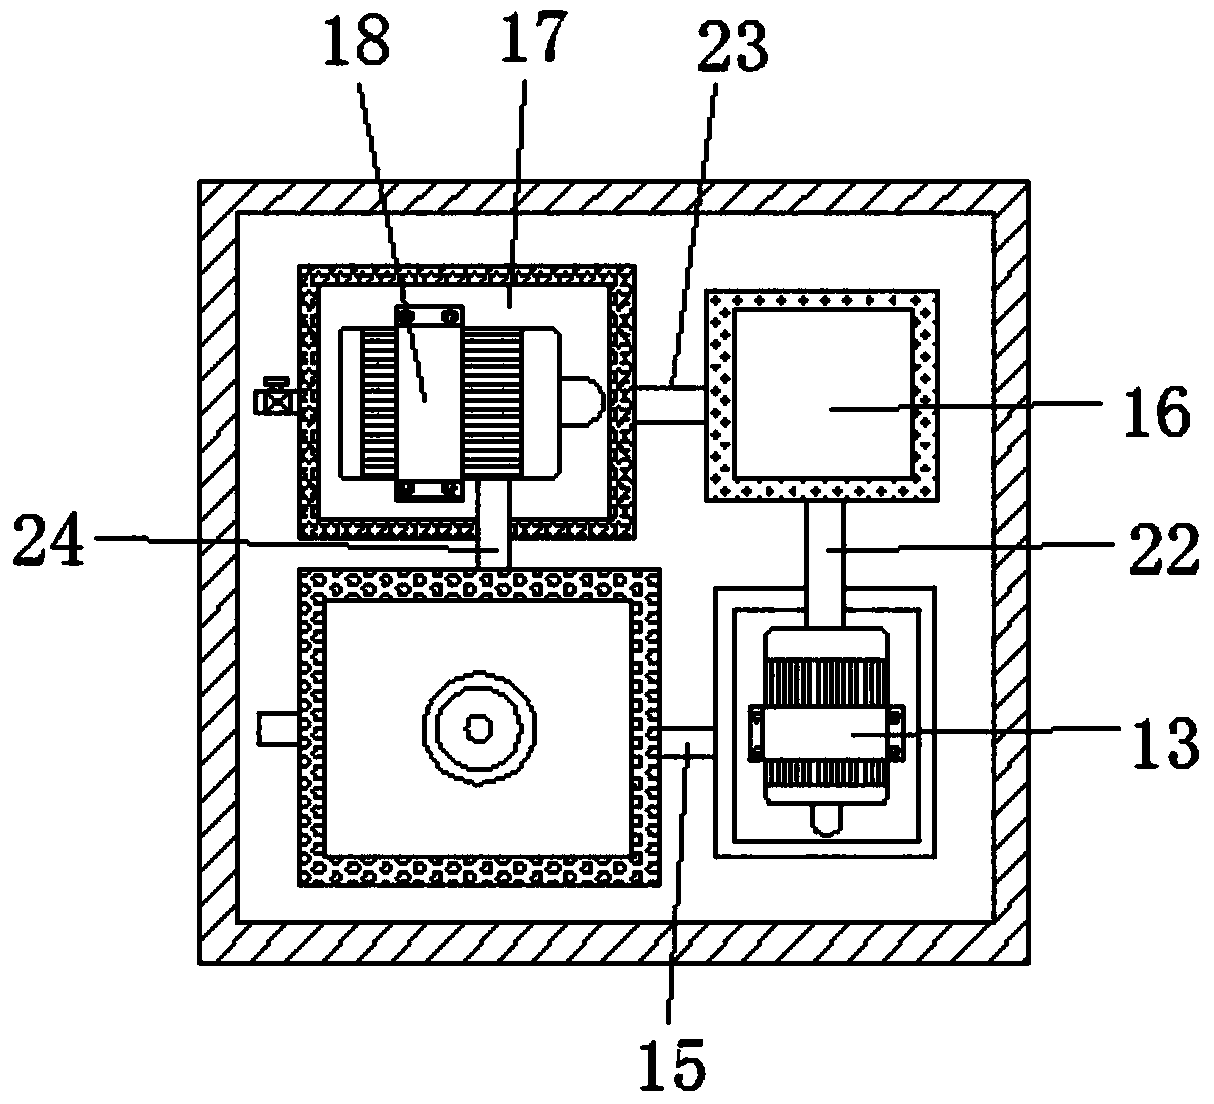 Pharmaceutical wastewater treatment and recovery device